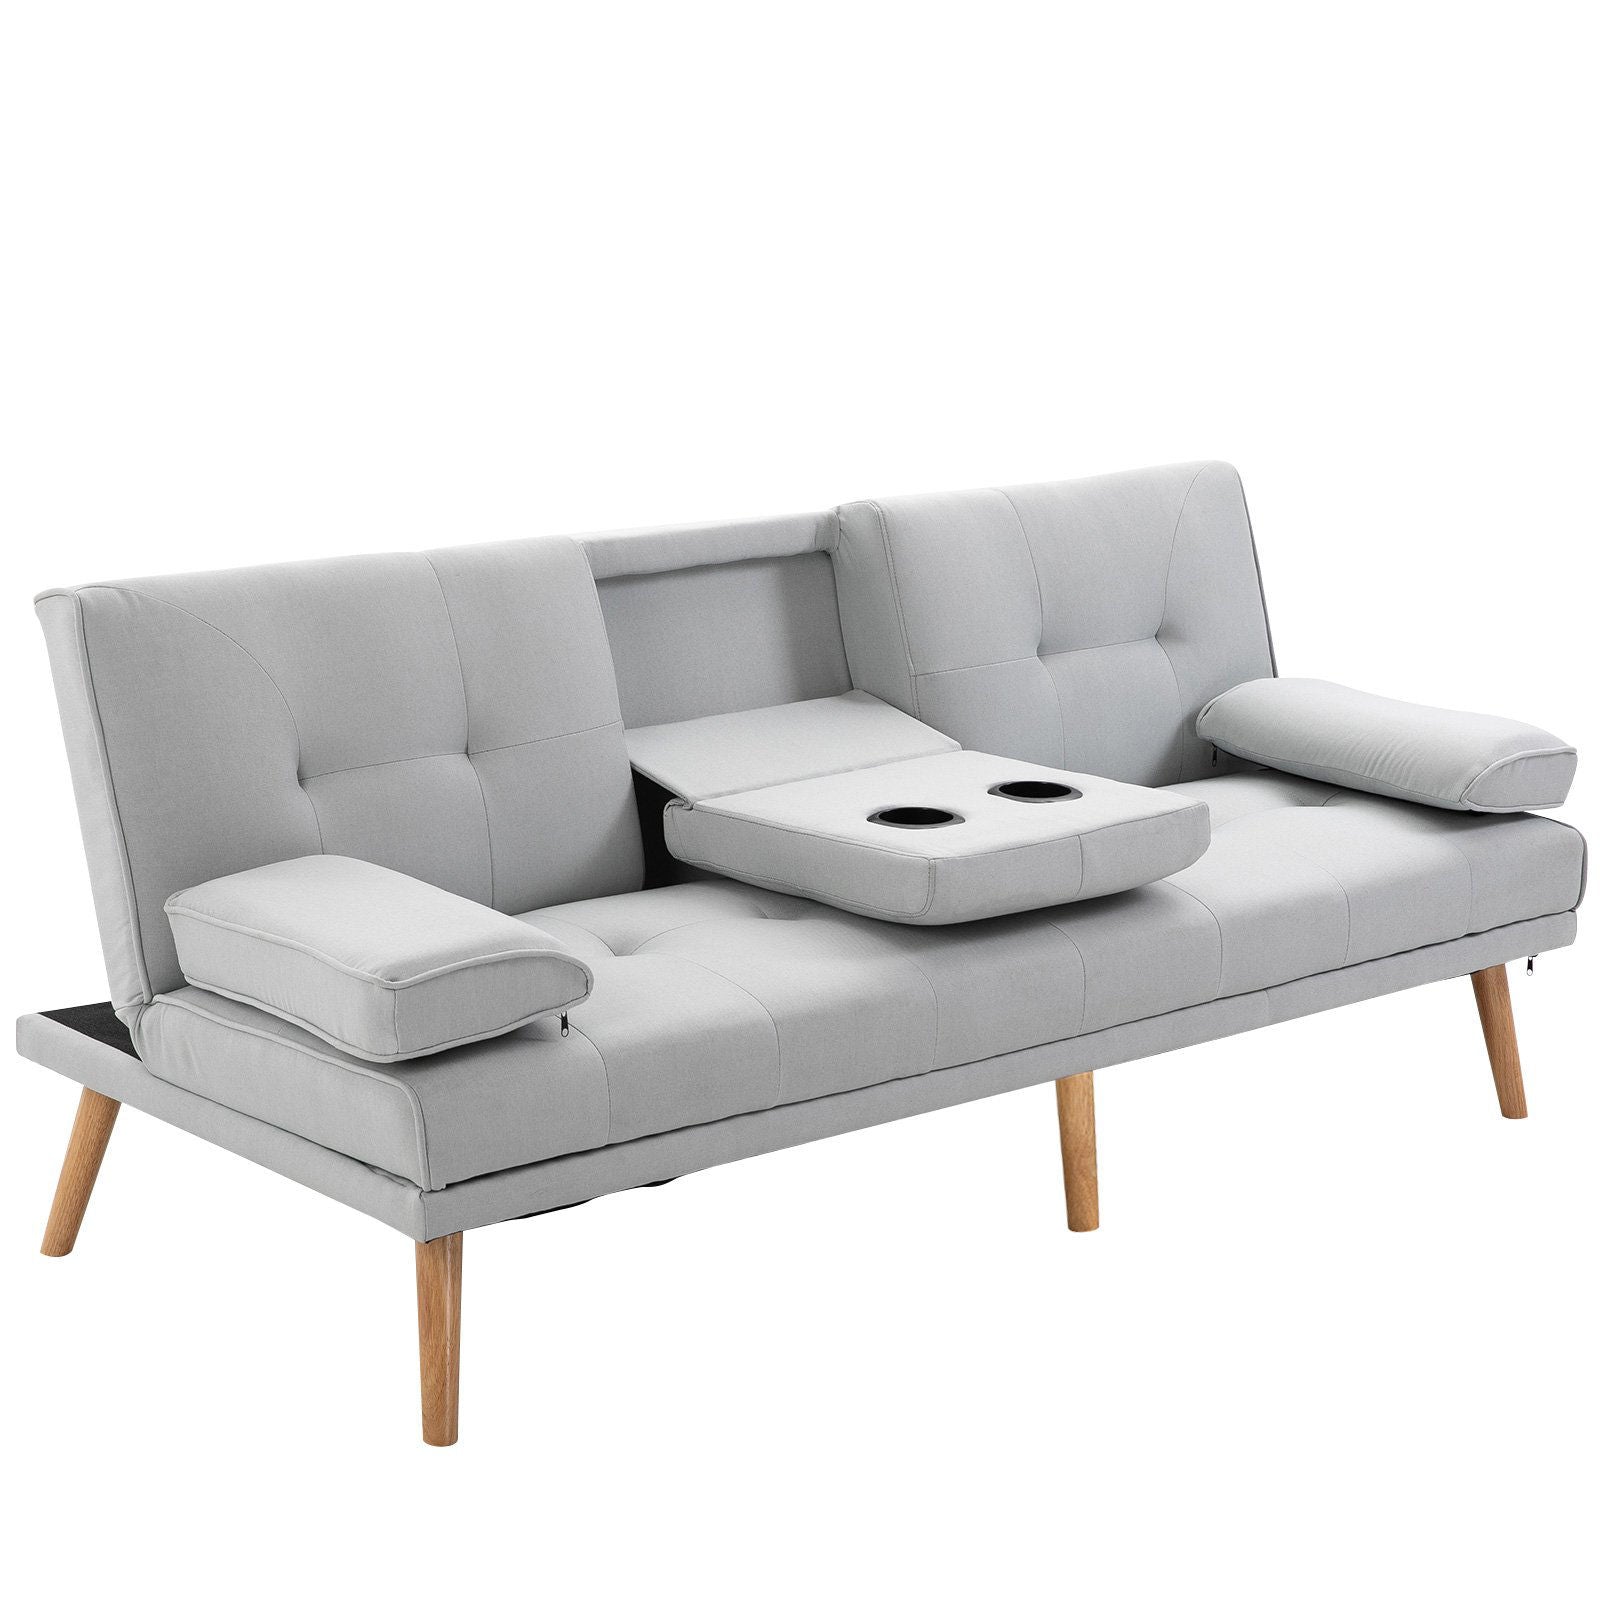 Nancy's Bellevue sofa bed - 3-seater sofa - folding guest bed - fabric sofa with linen look - sofa bed with cup holder, in Scandi design, light gray